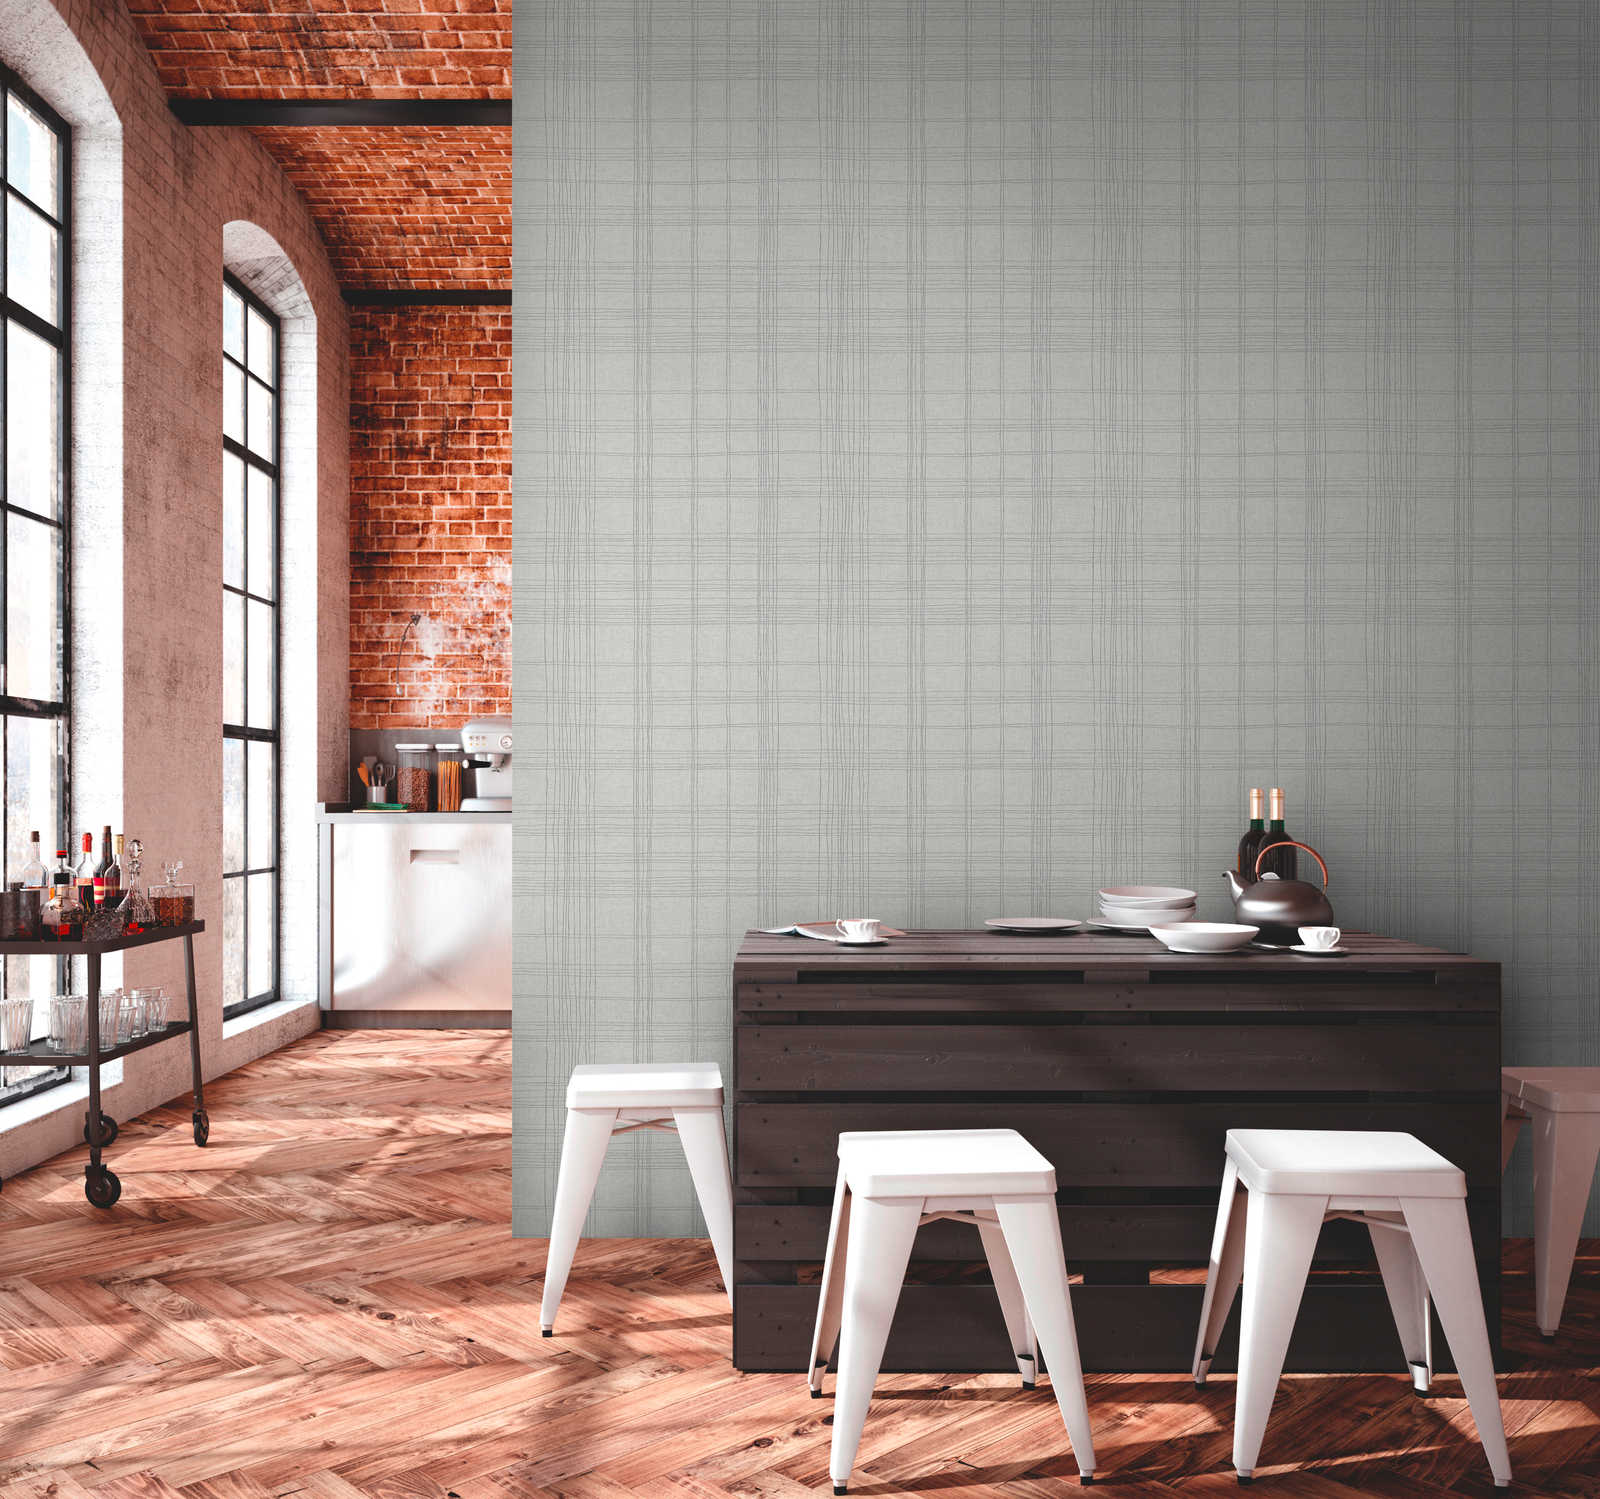             Lined non-woven wallpaper with metallic effect & check pattern - grey, metallic, white
        